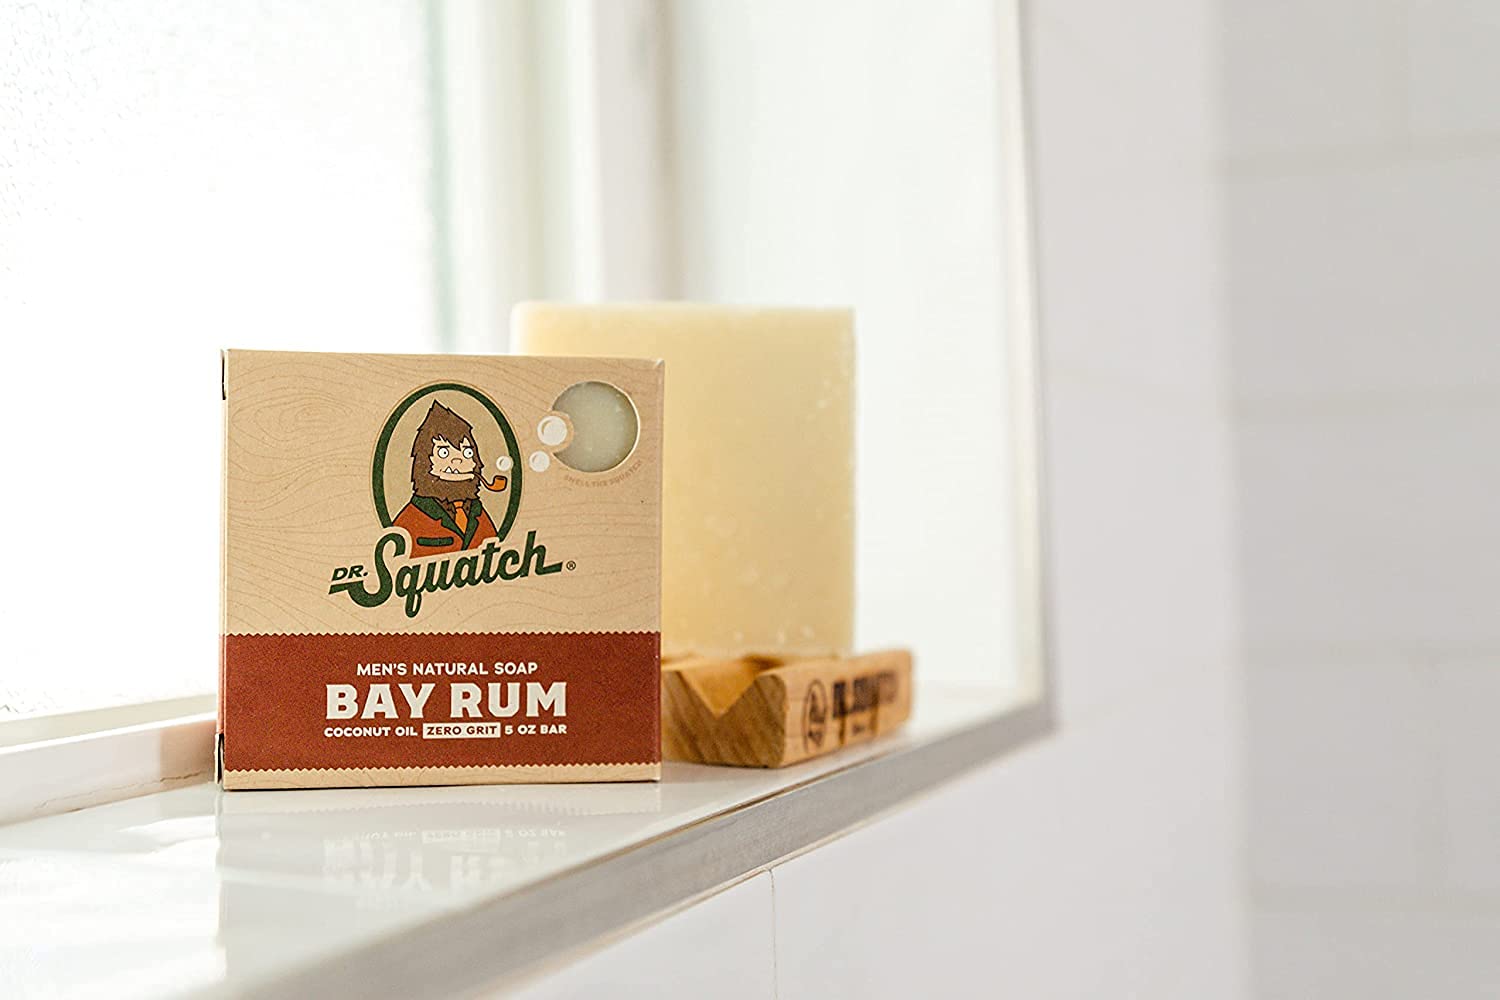 New! Dr. Squatch BAY RUM Premium Candle With Bay Rum Soap Bar, Dr Squatch  Sticker and Burlap Bag!